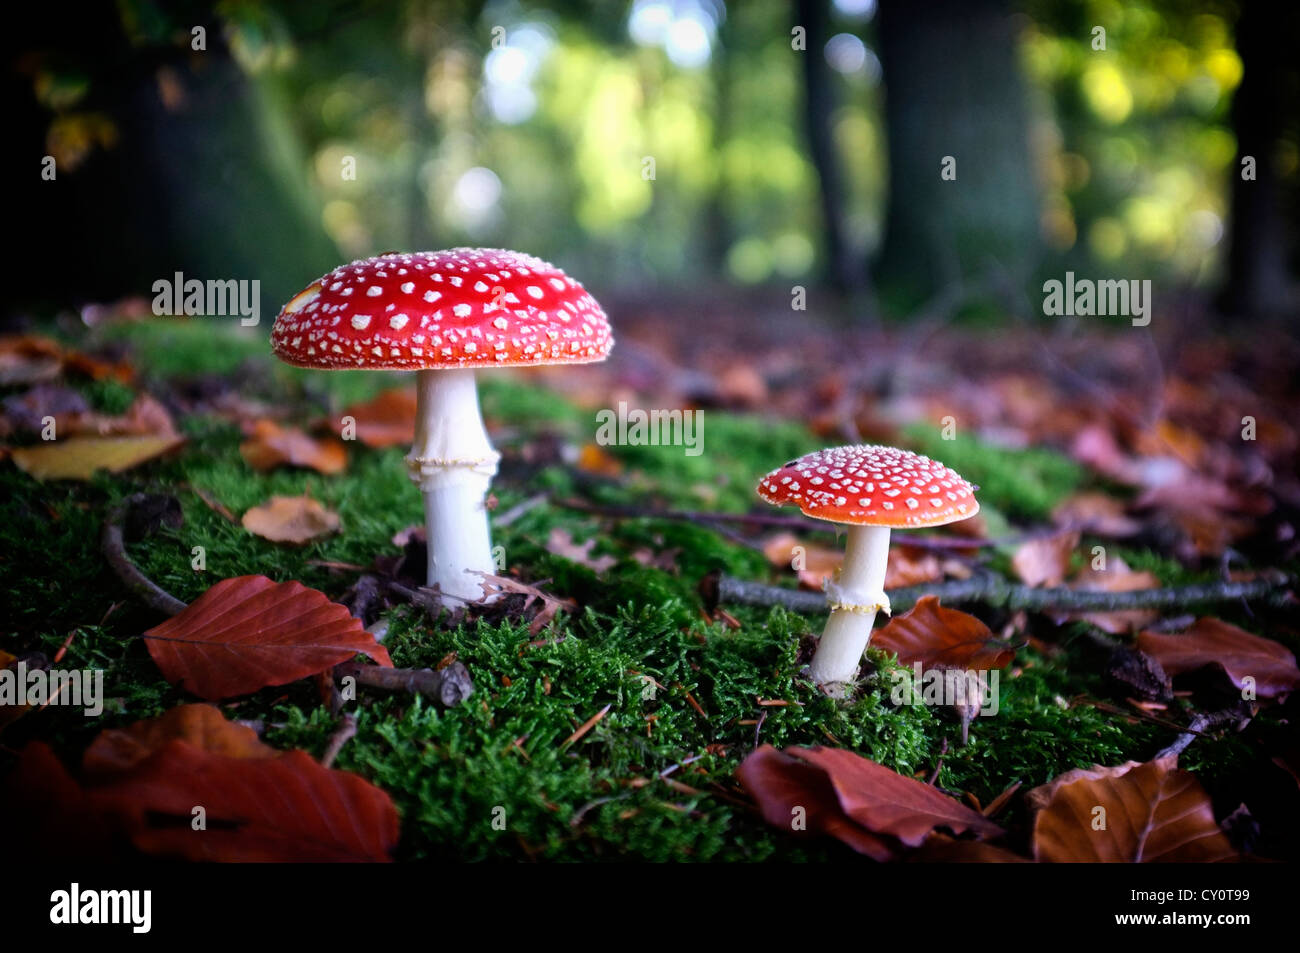 mushrooms in a forest Stock Photo